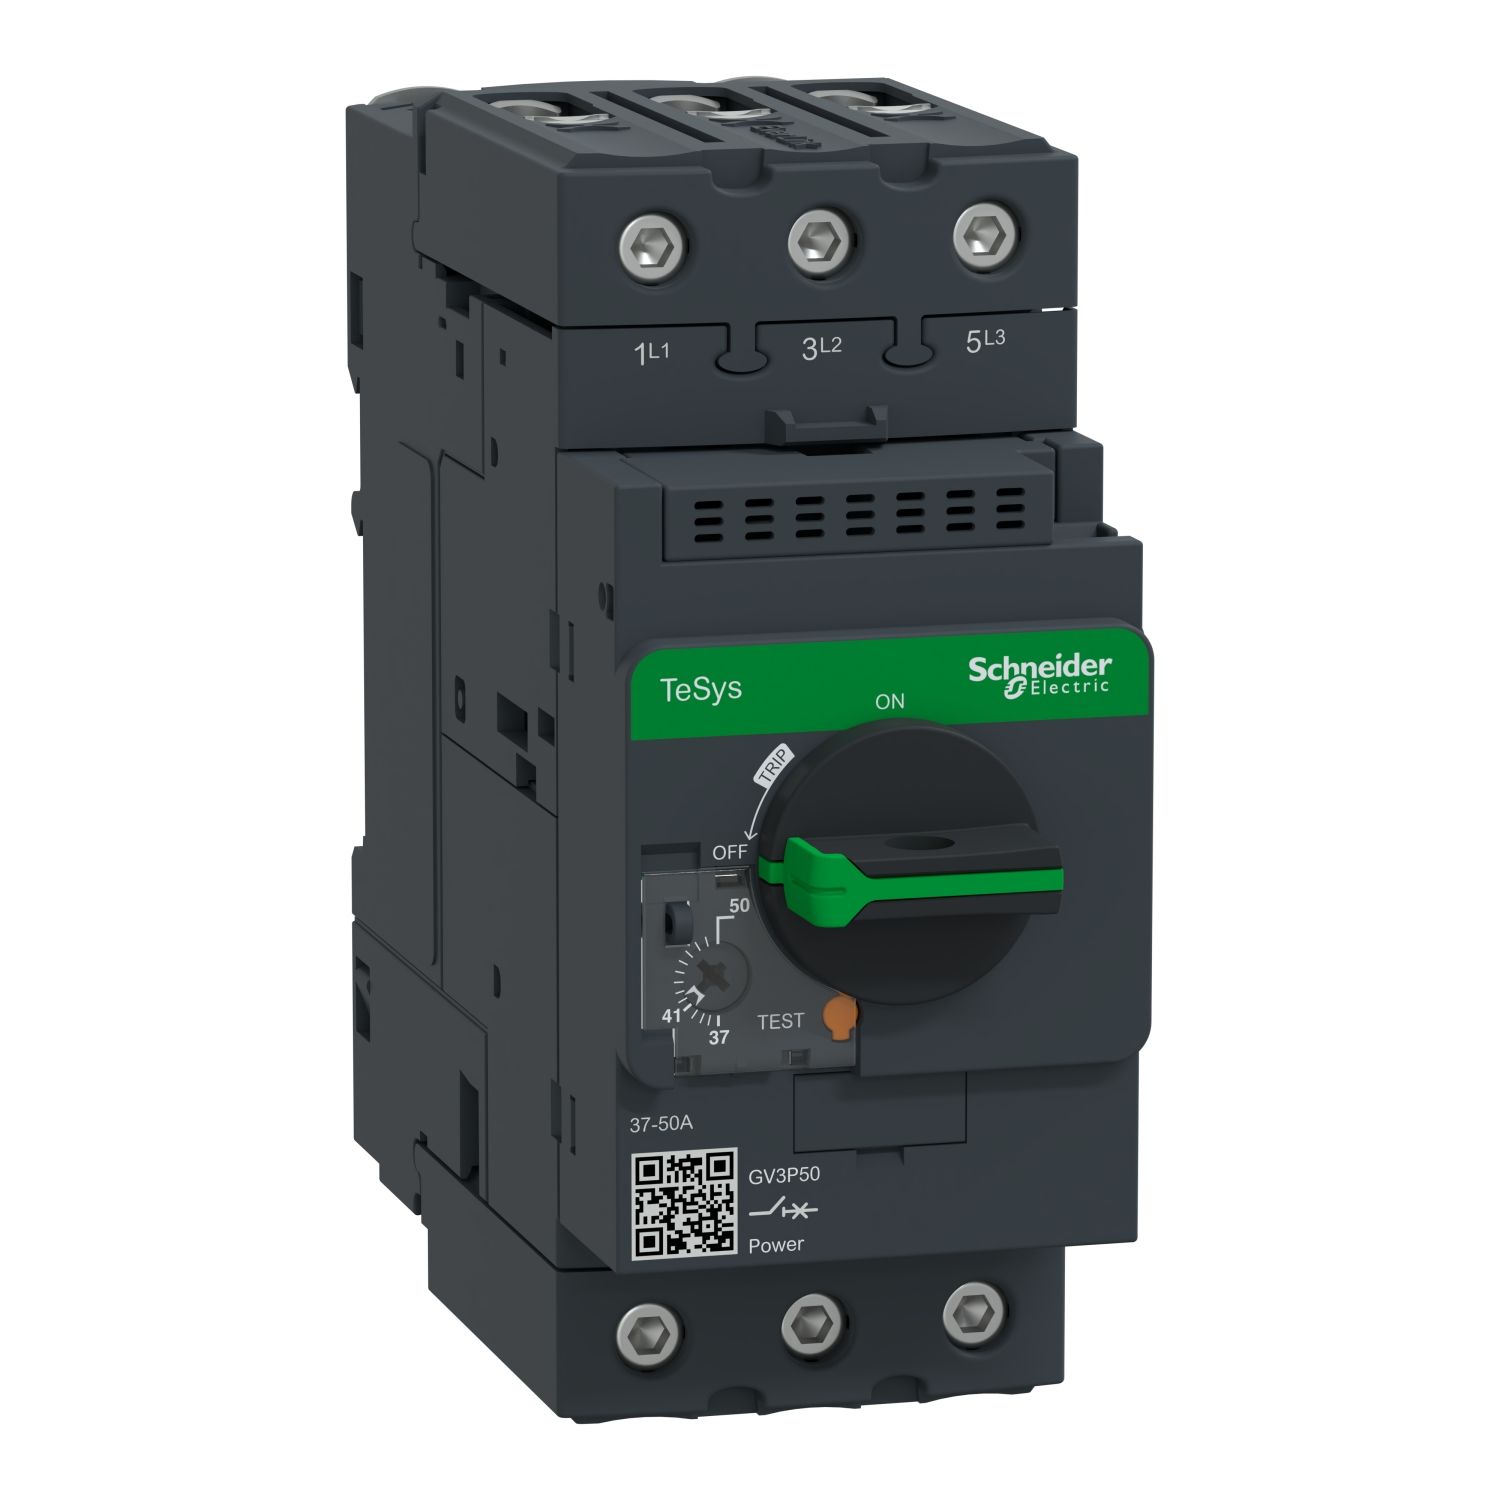 GV3P50 Motor circuit breaker,TeSys Deca frame 3,3P,37-50A,thermal magnetic,EverLink terminals